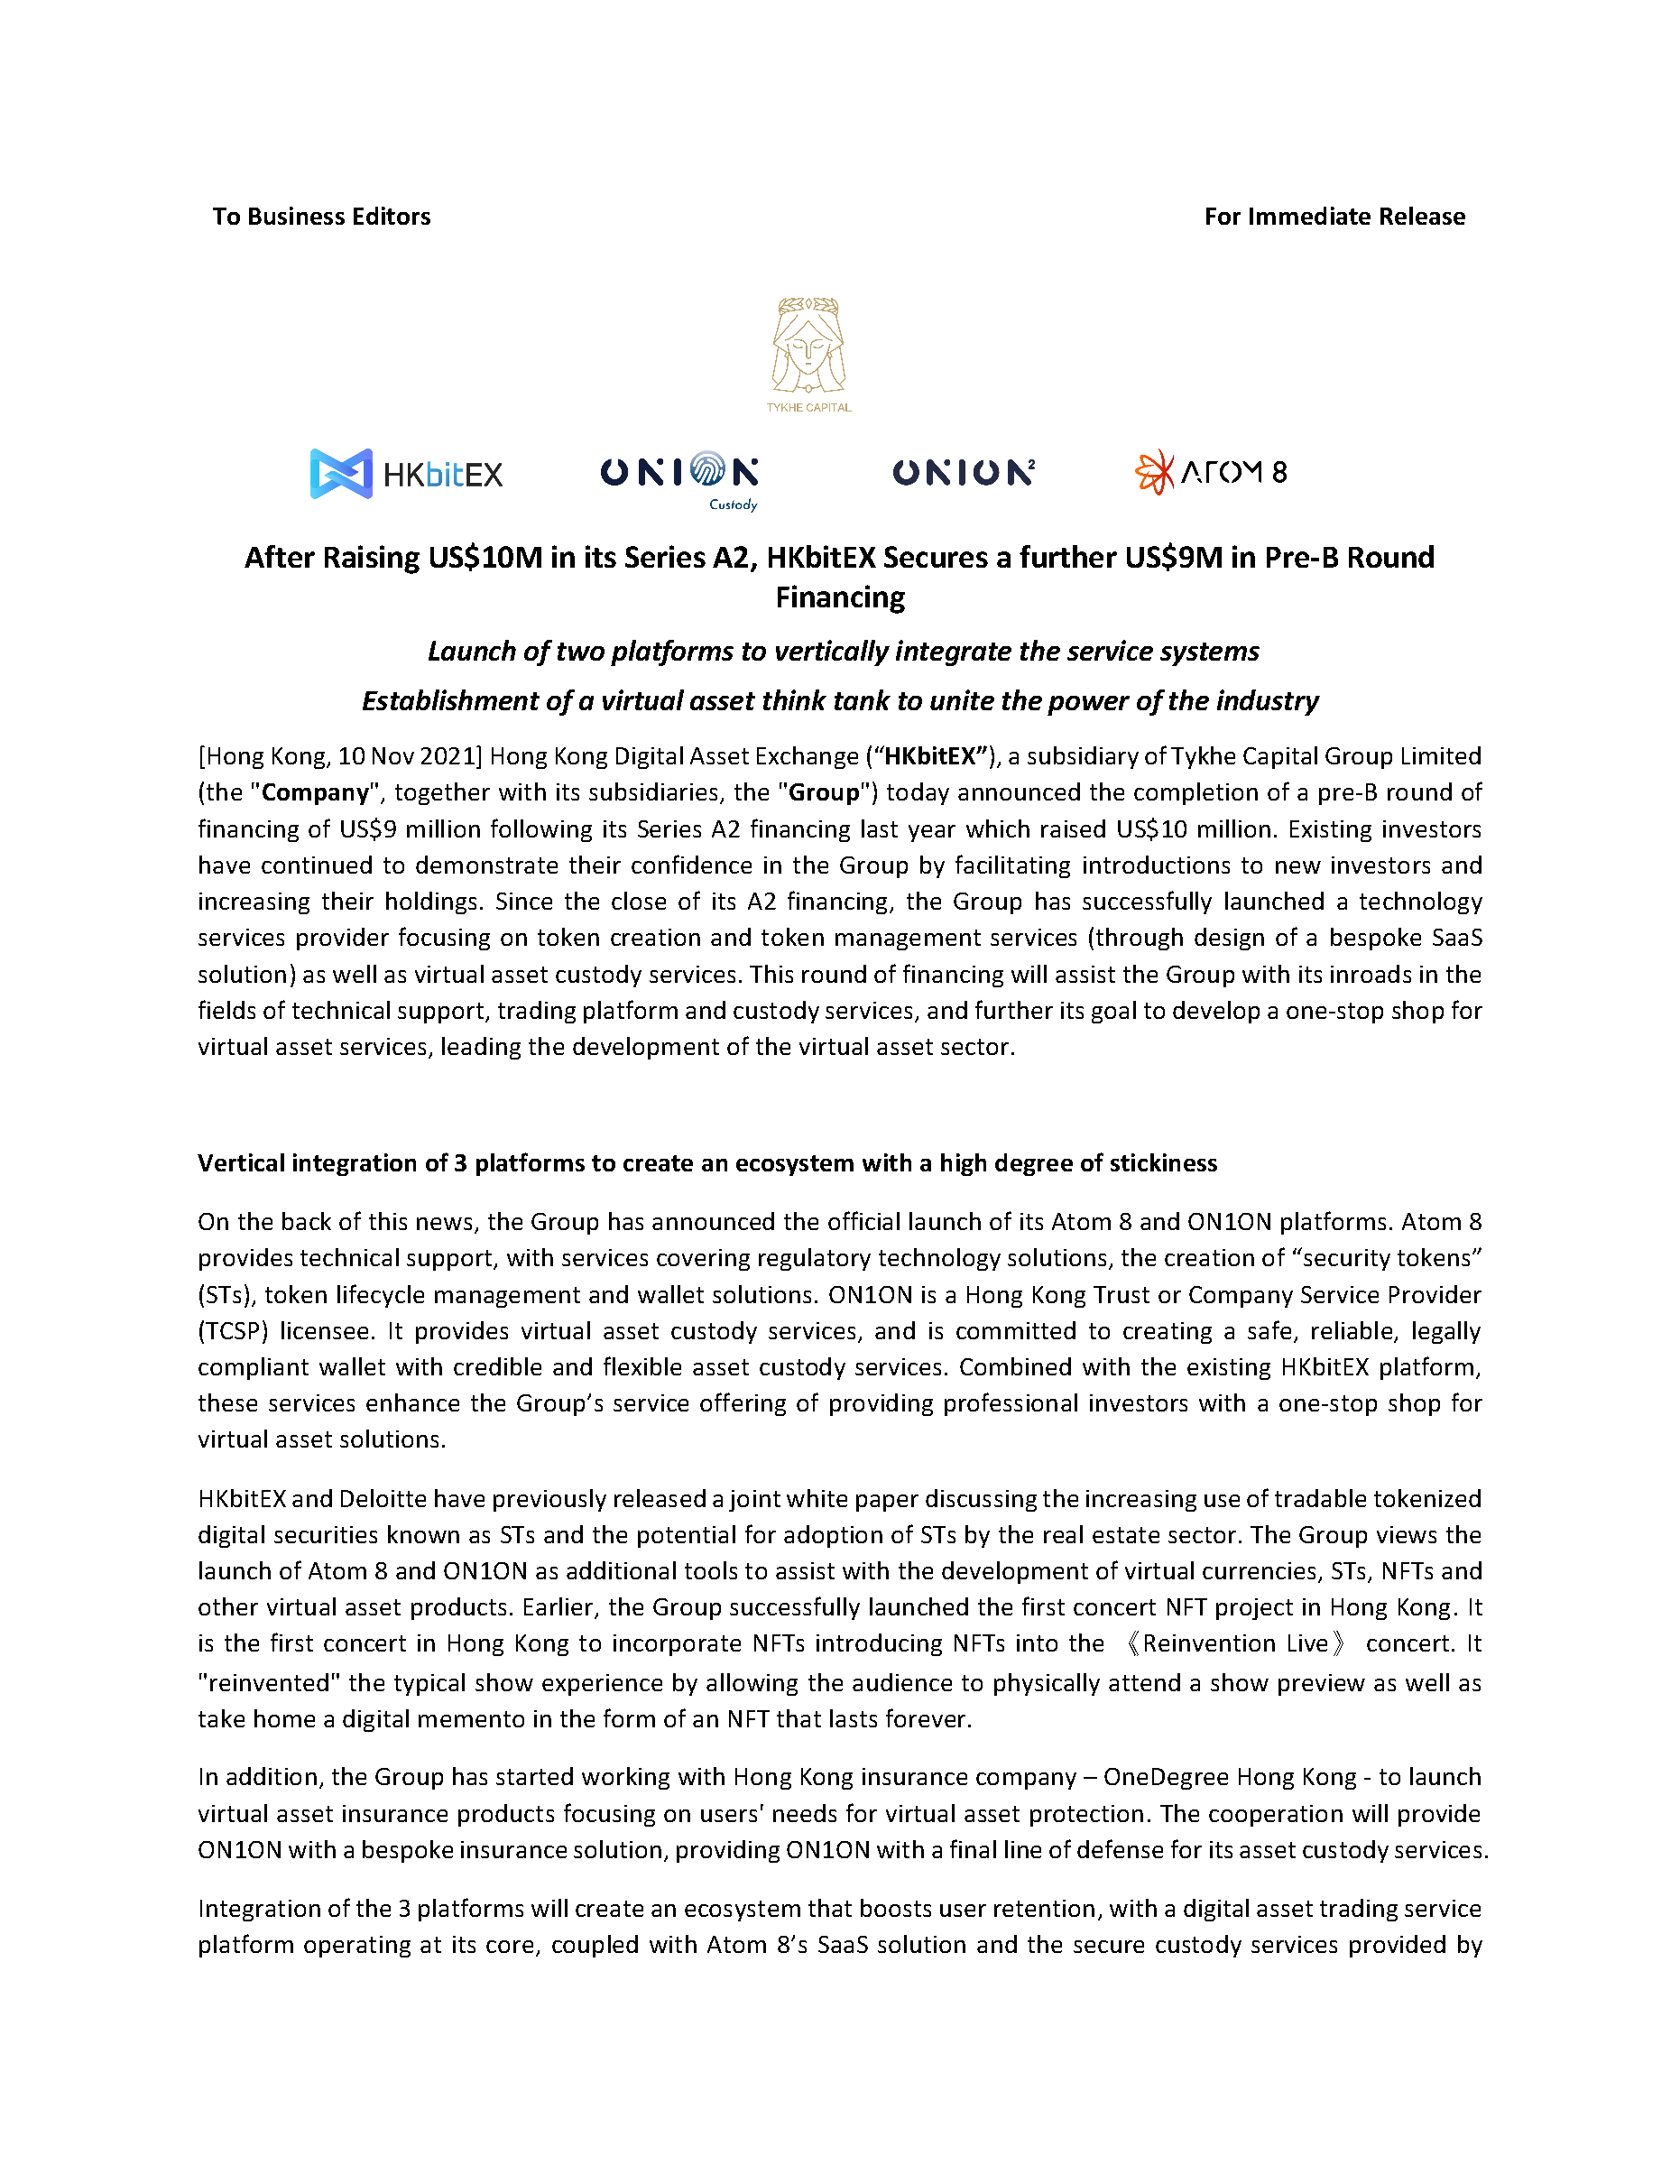 _For_immediate_release_After_Raising_US_10M_in_its_Series_A2__HKbitEX_Secures_a_further_US_9M_in_Pre-B_Round_Financing__1110_1__Page_1.png